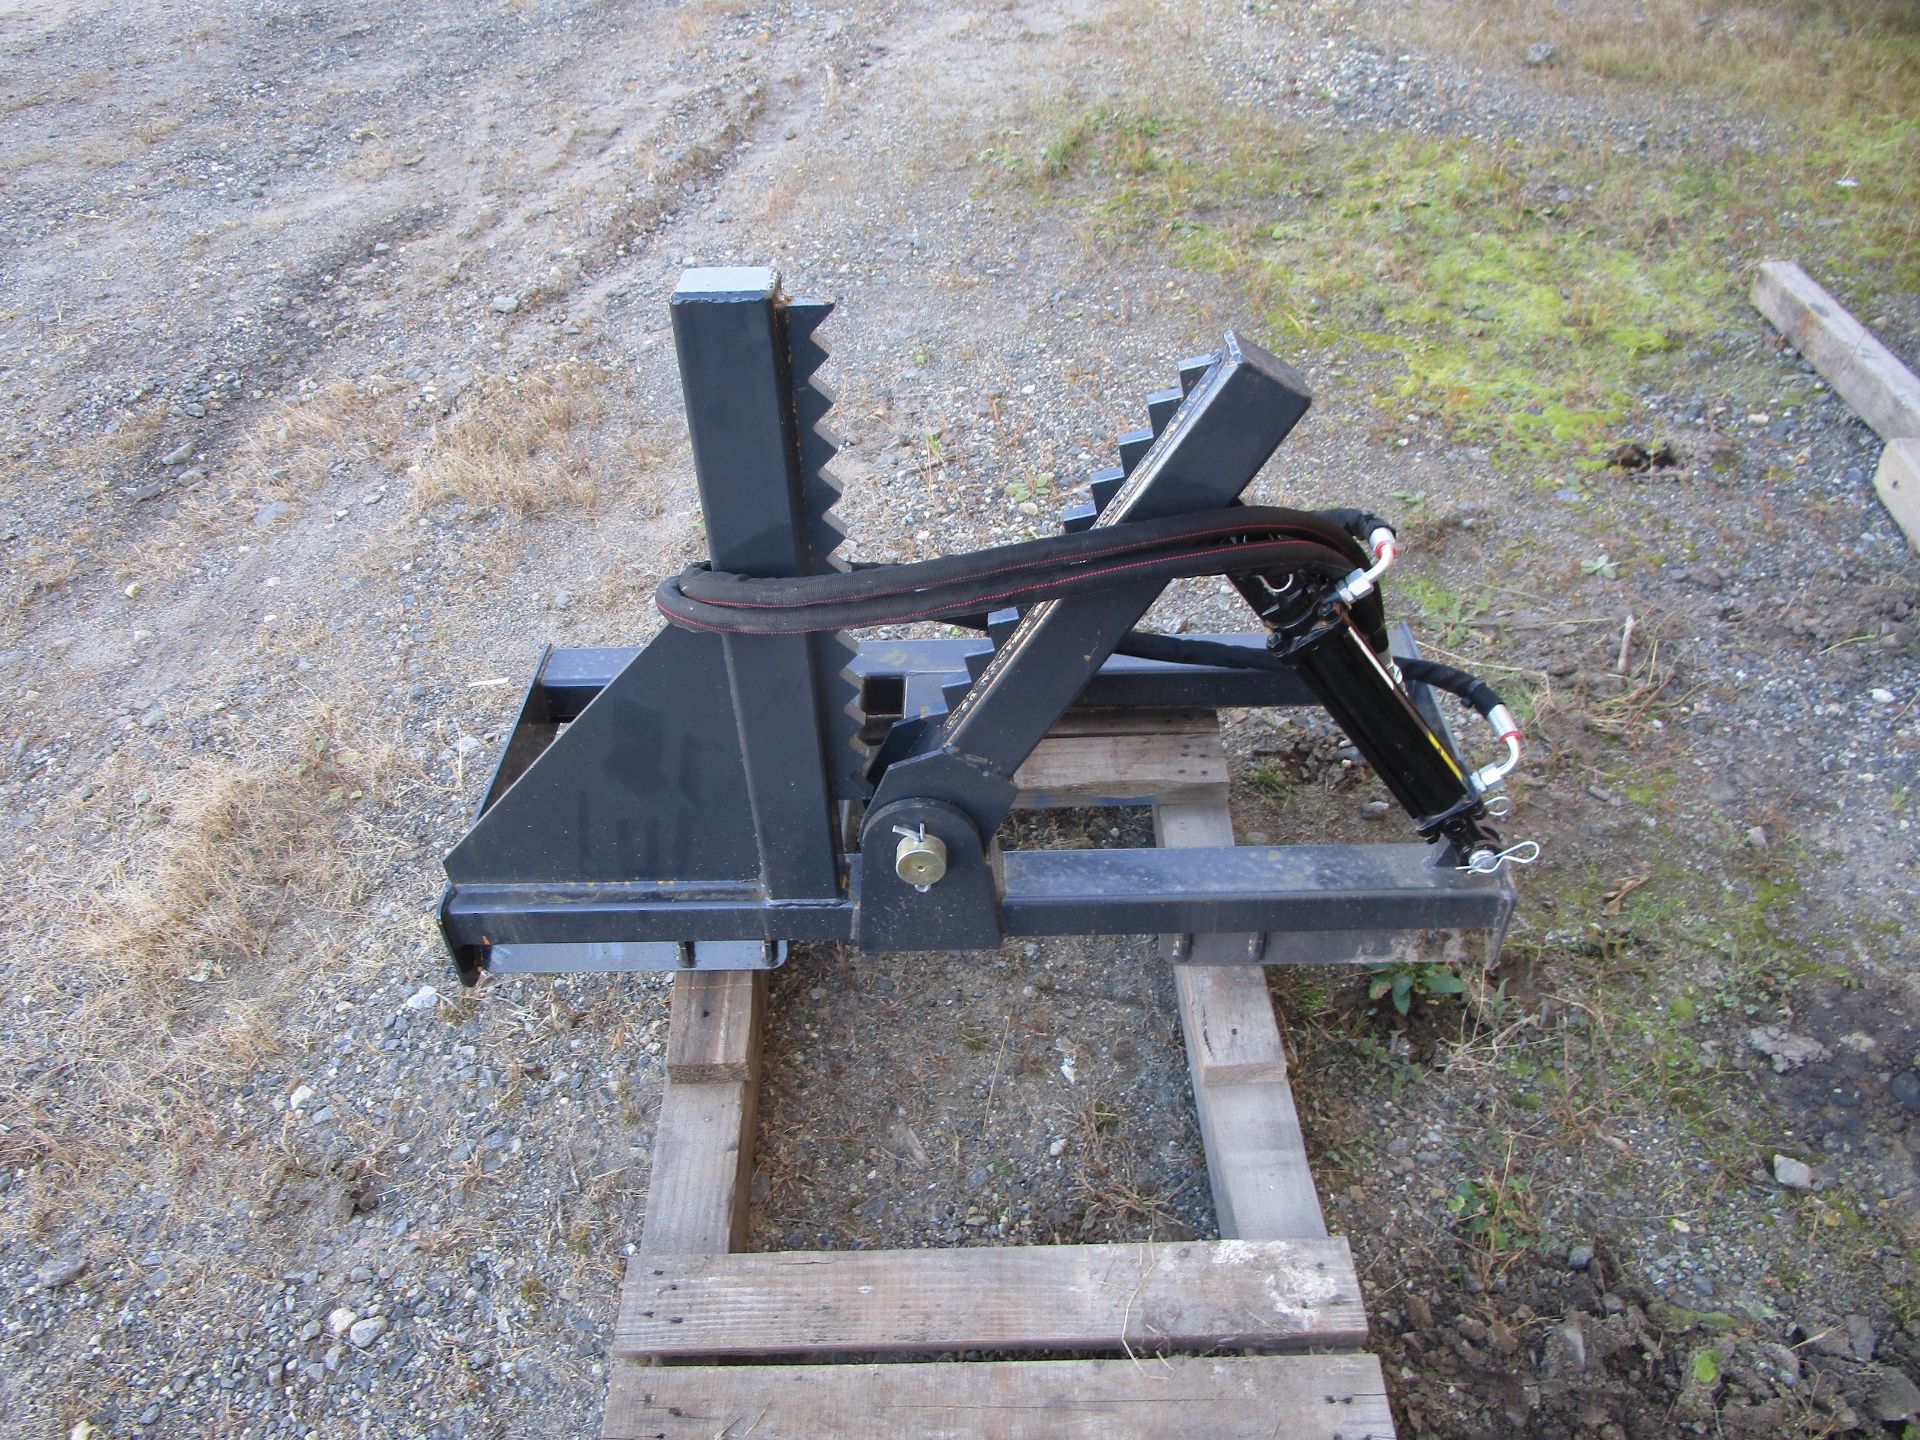 New Wolverine Skid Steer Attachment Tree Puller/Grappler (C69E) - Image 3 of 5